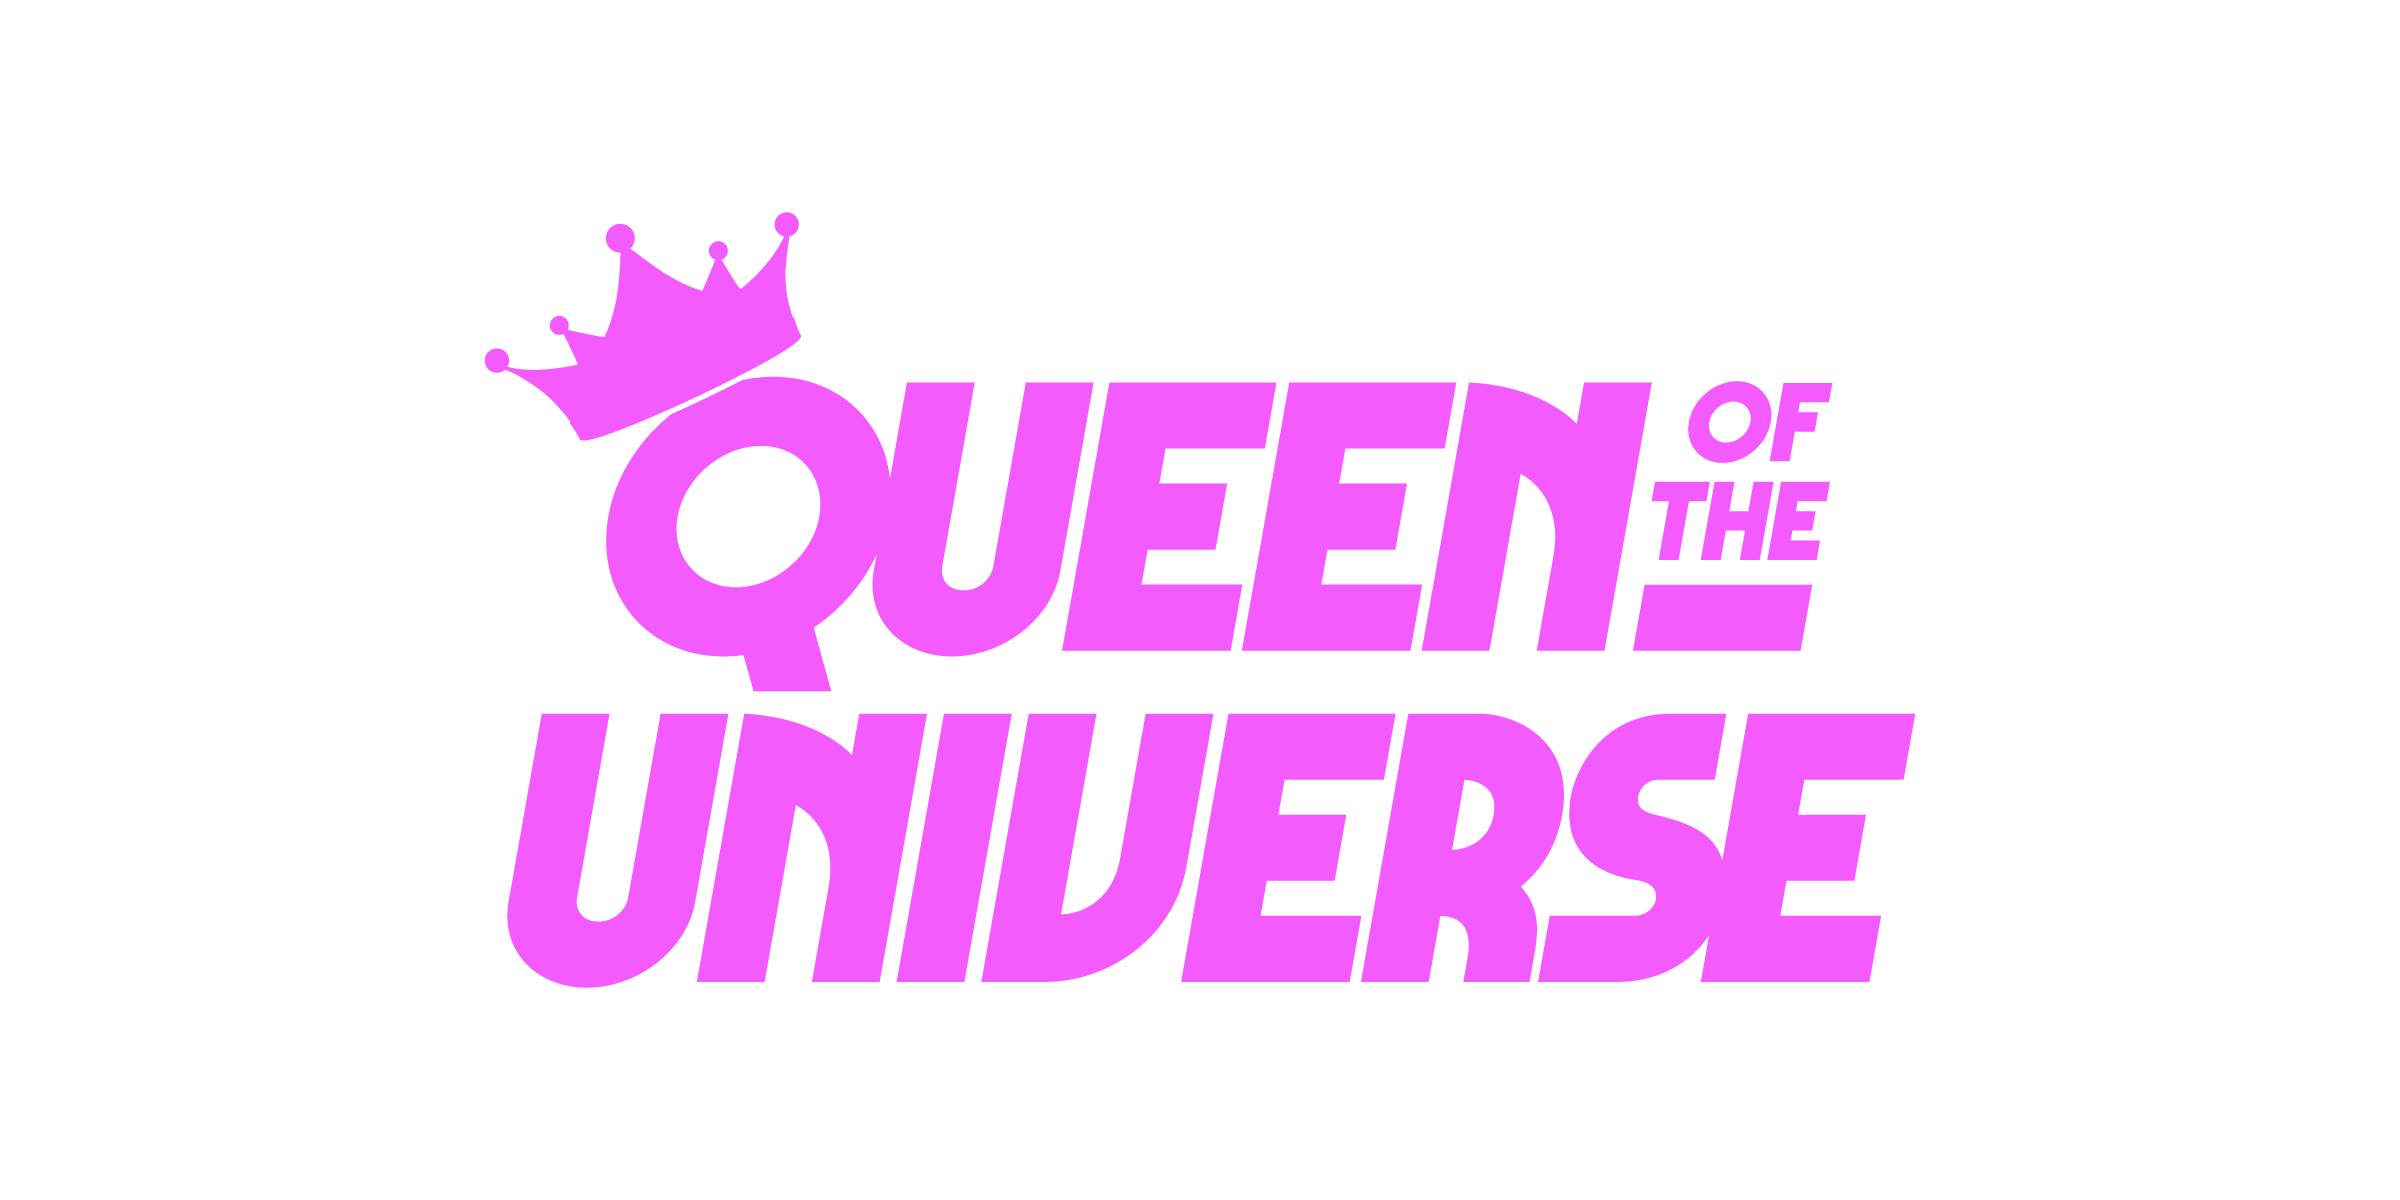 Queen of the Universe